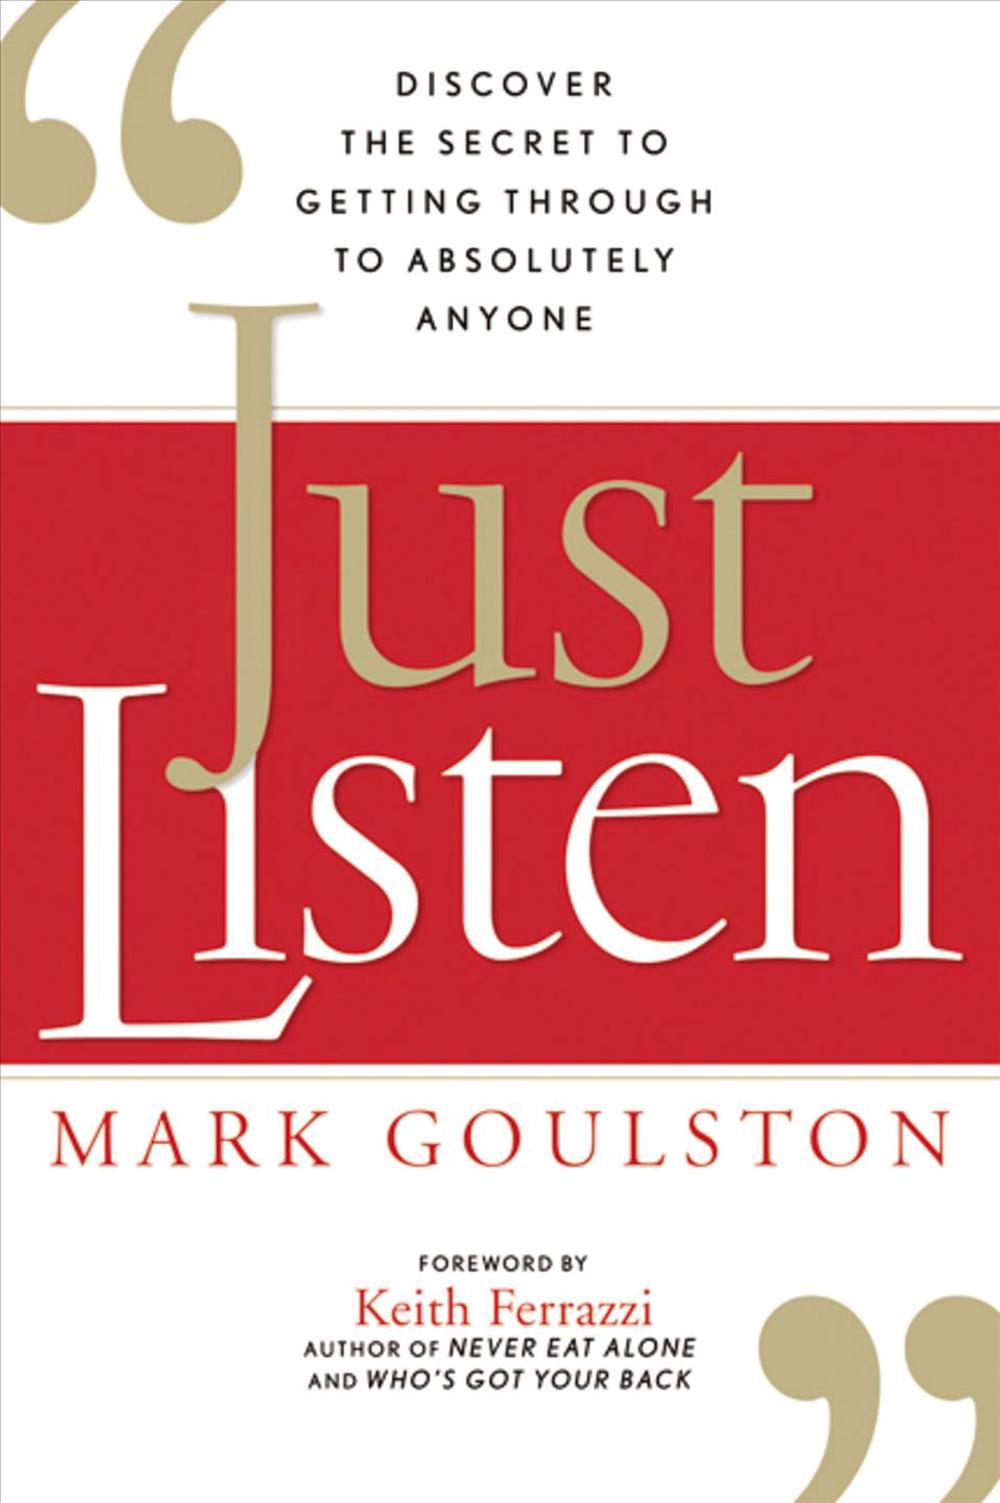 Just Listen Discover the Secret to Getting Through to Absolutely Anyone